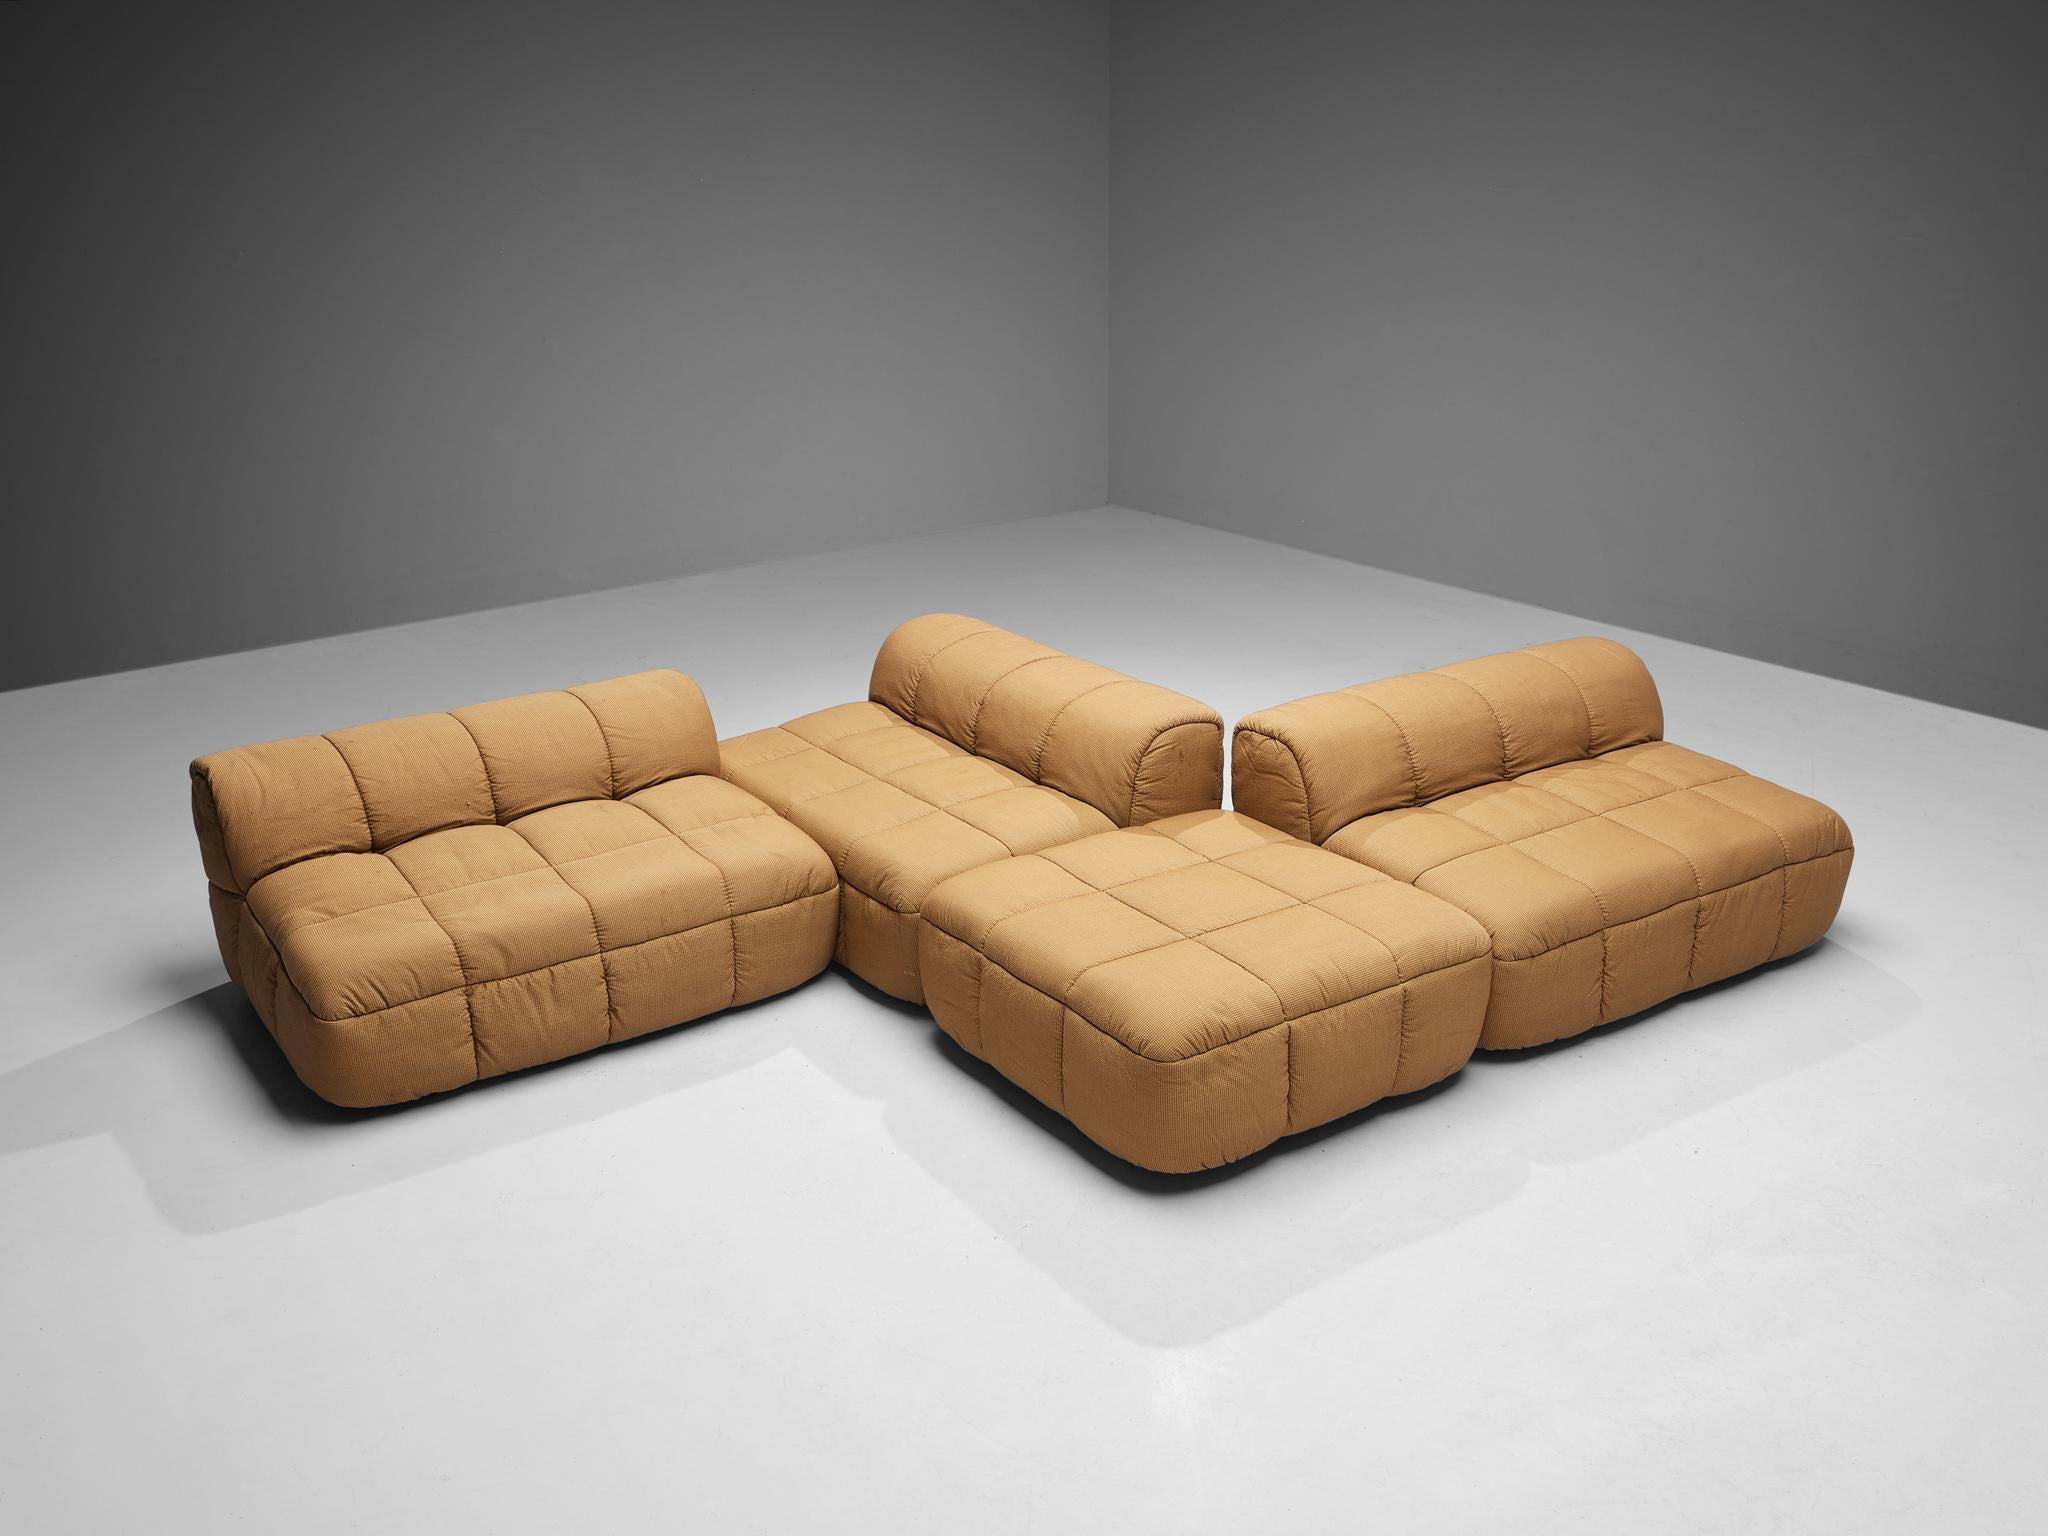 Cini Boeri for Arflex, three modular 'strips' sofa with ottoman, chrome, fabric upholstery, Italy, 1970s

Stunning 'Strips' sofa designed by Italian designer Cini Boeri for Arflex. The sofa consists out of three elements and one ottoman that can be